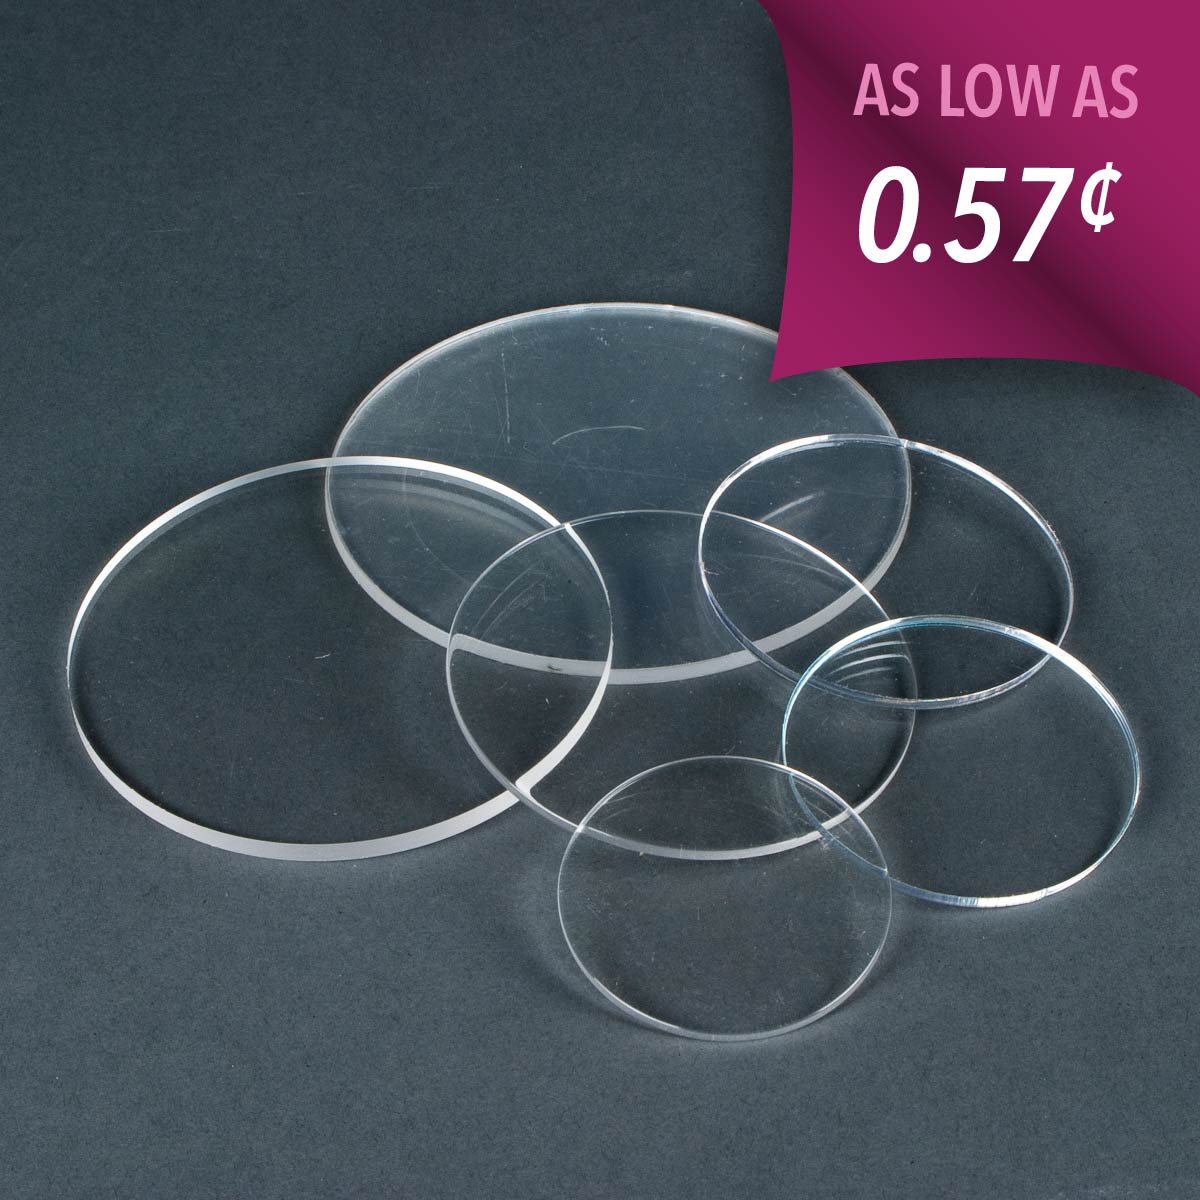 Clear acrylic flat disks available in various diameters